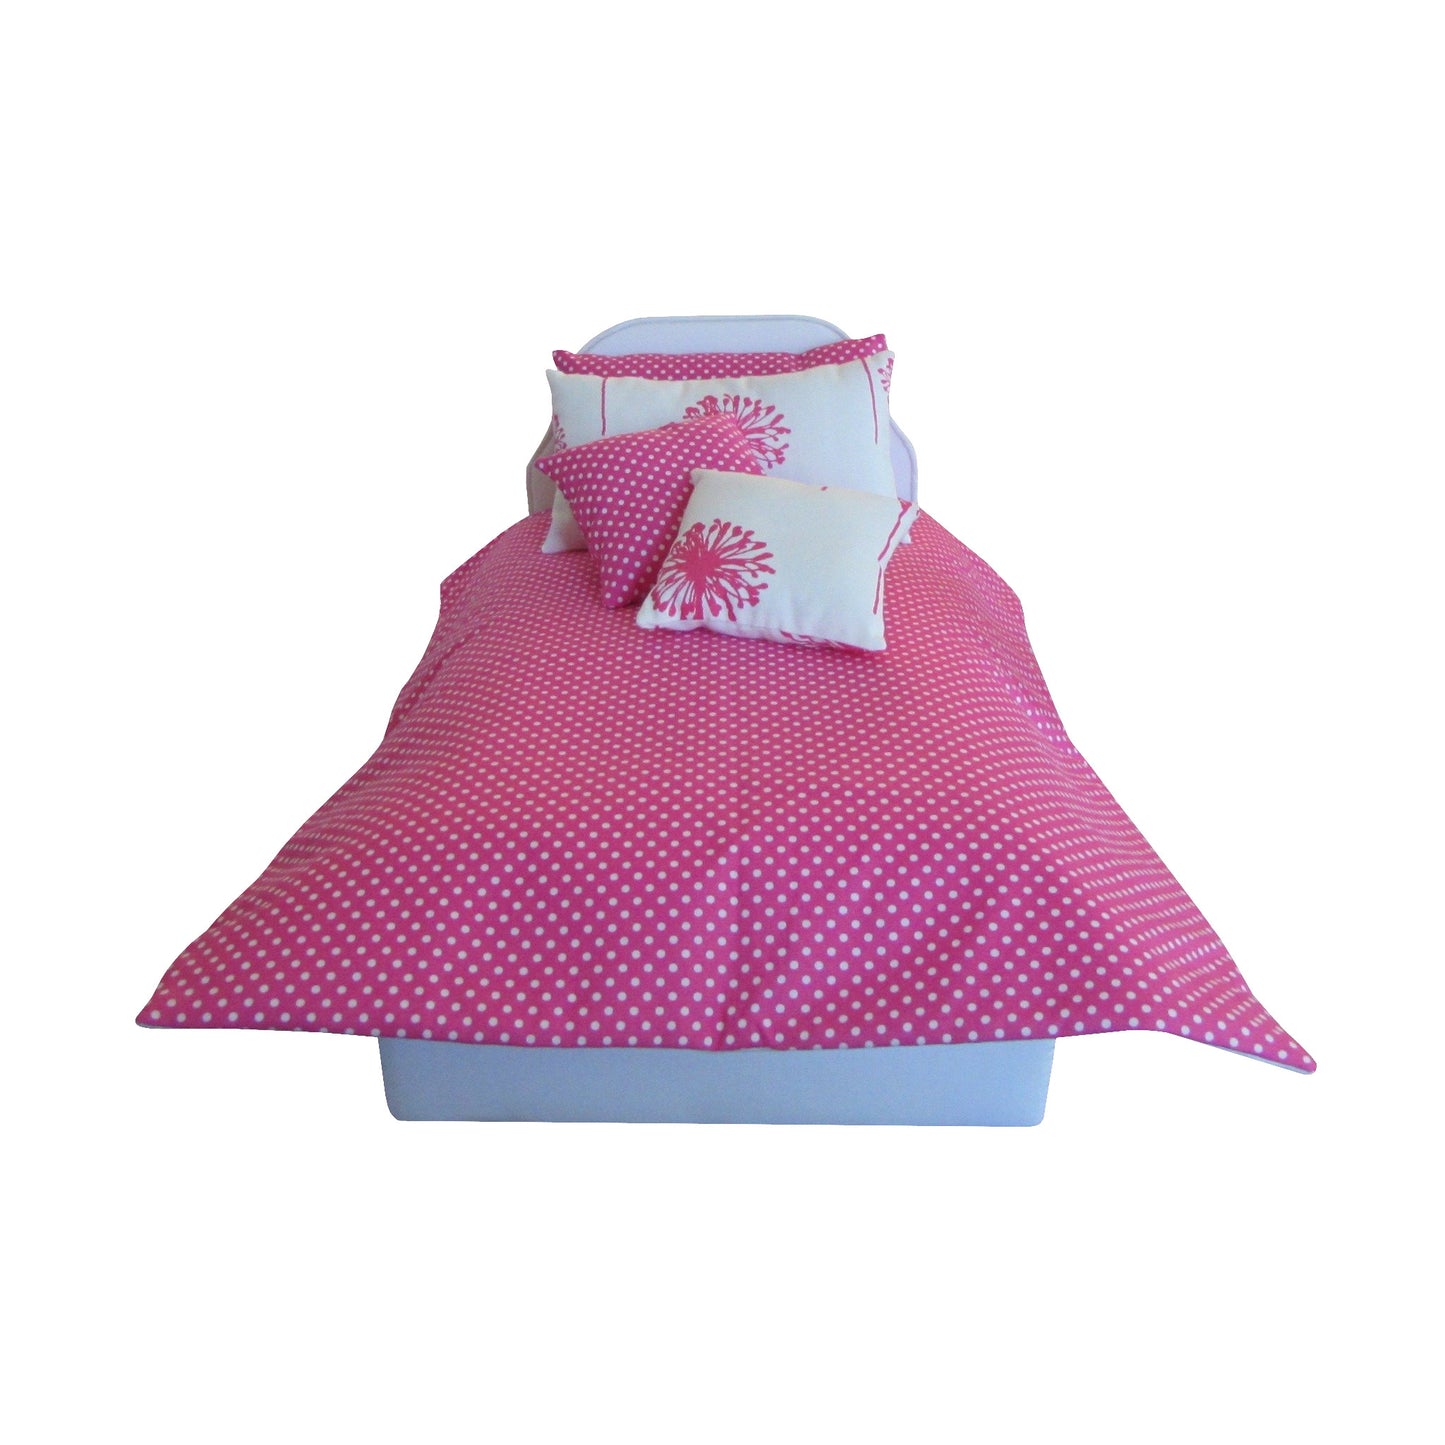 Candy Pink Dandelion Doll Pillows and White Dots on Pink Doll Comforter for 18-inch dolls